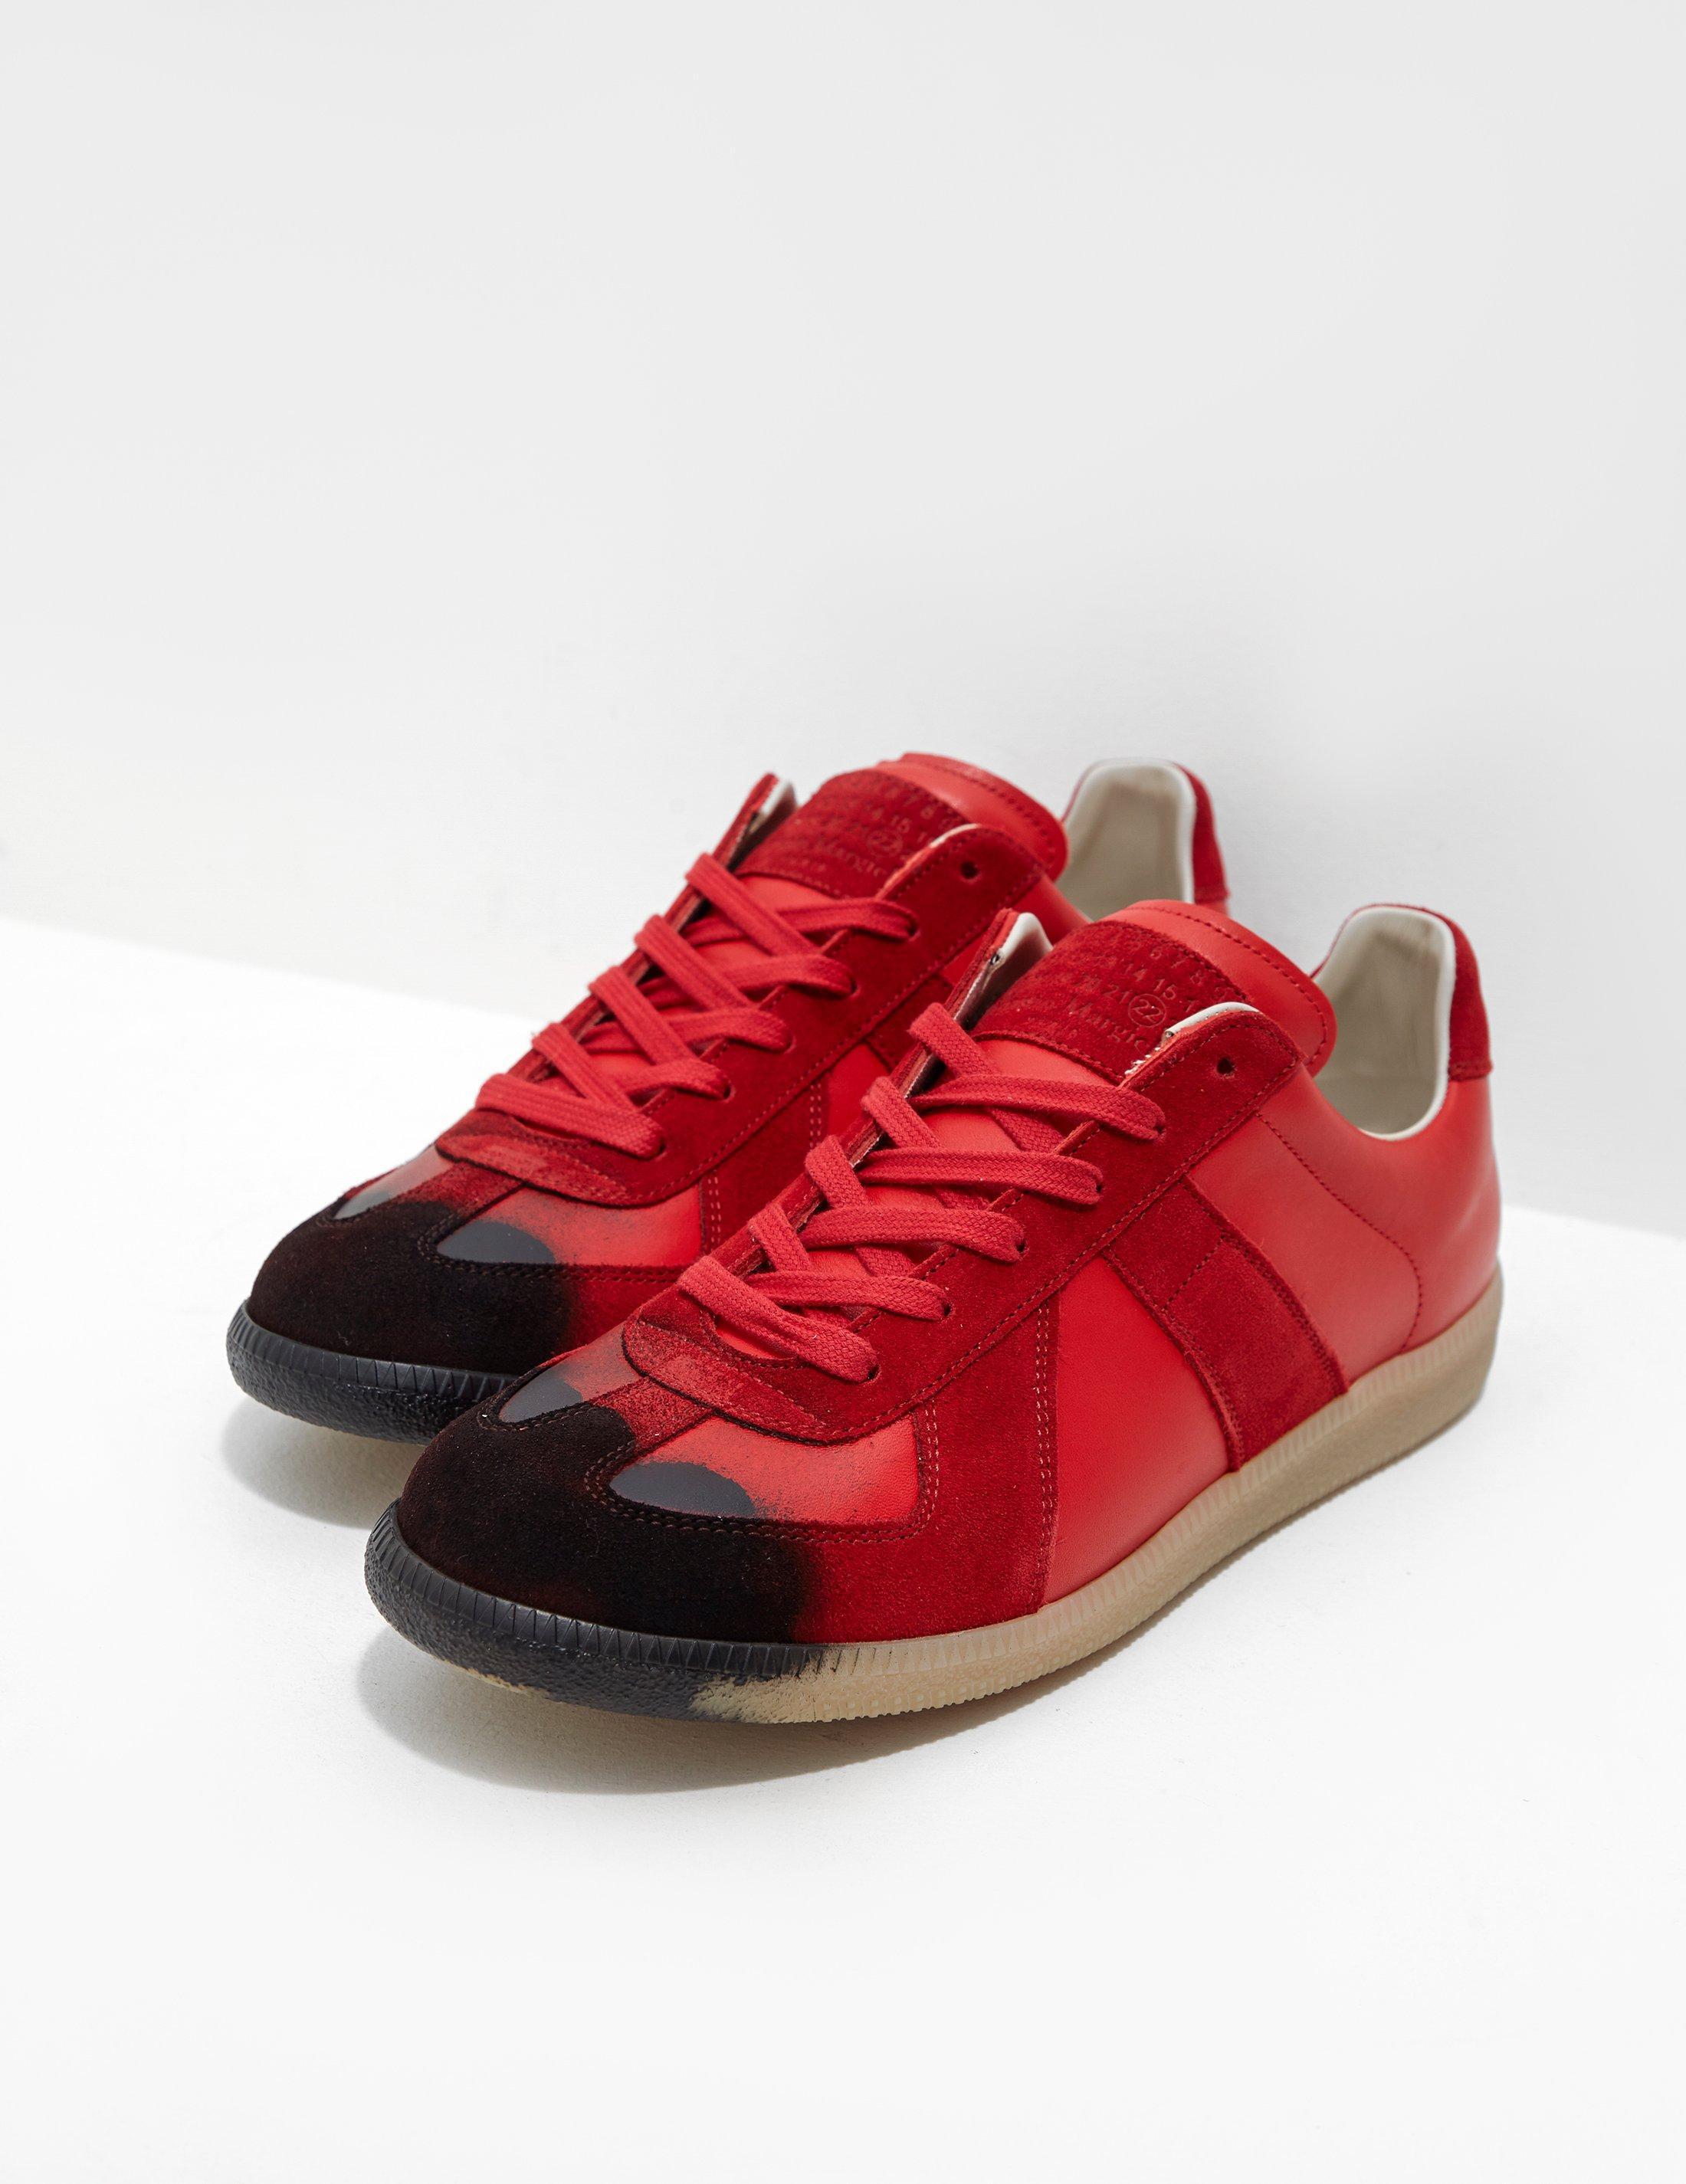 Maison Margiela Leather Replica Spray Trainers Red for Men - Lyst